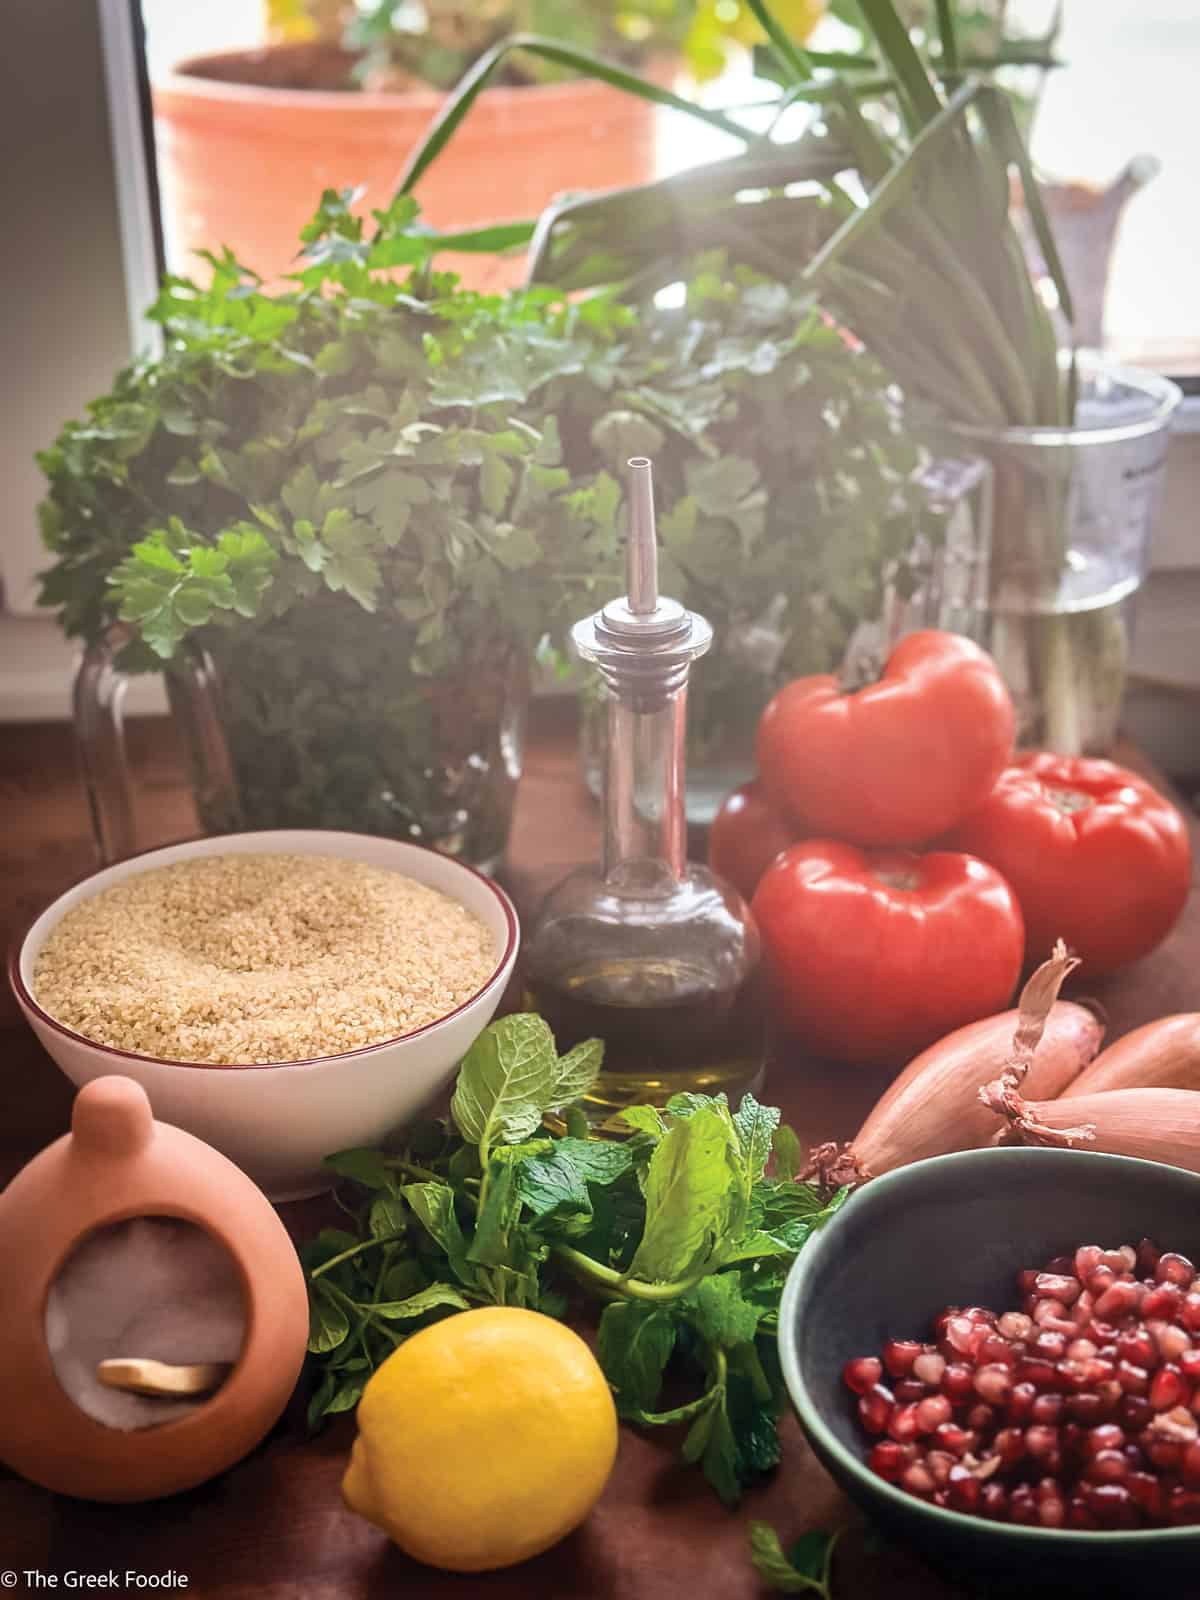 In front of a window on a table are bunches of parsley, a bowl with bulgur wheat, tomatoes, a lemon, pomegranate seeds and mint.